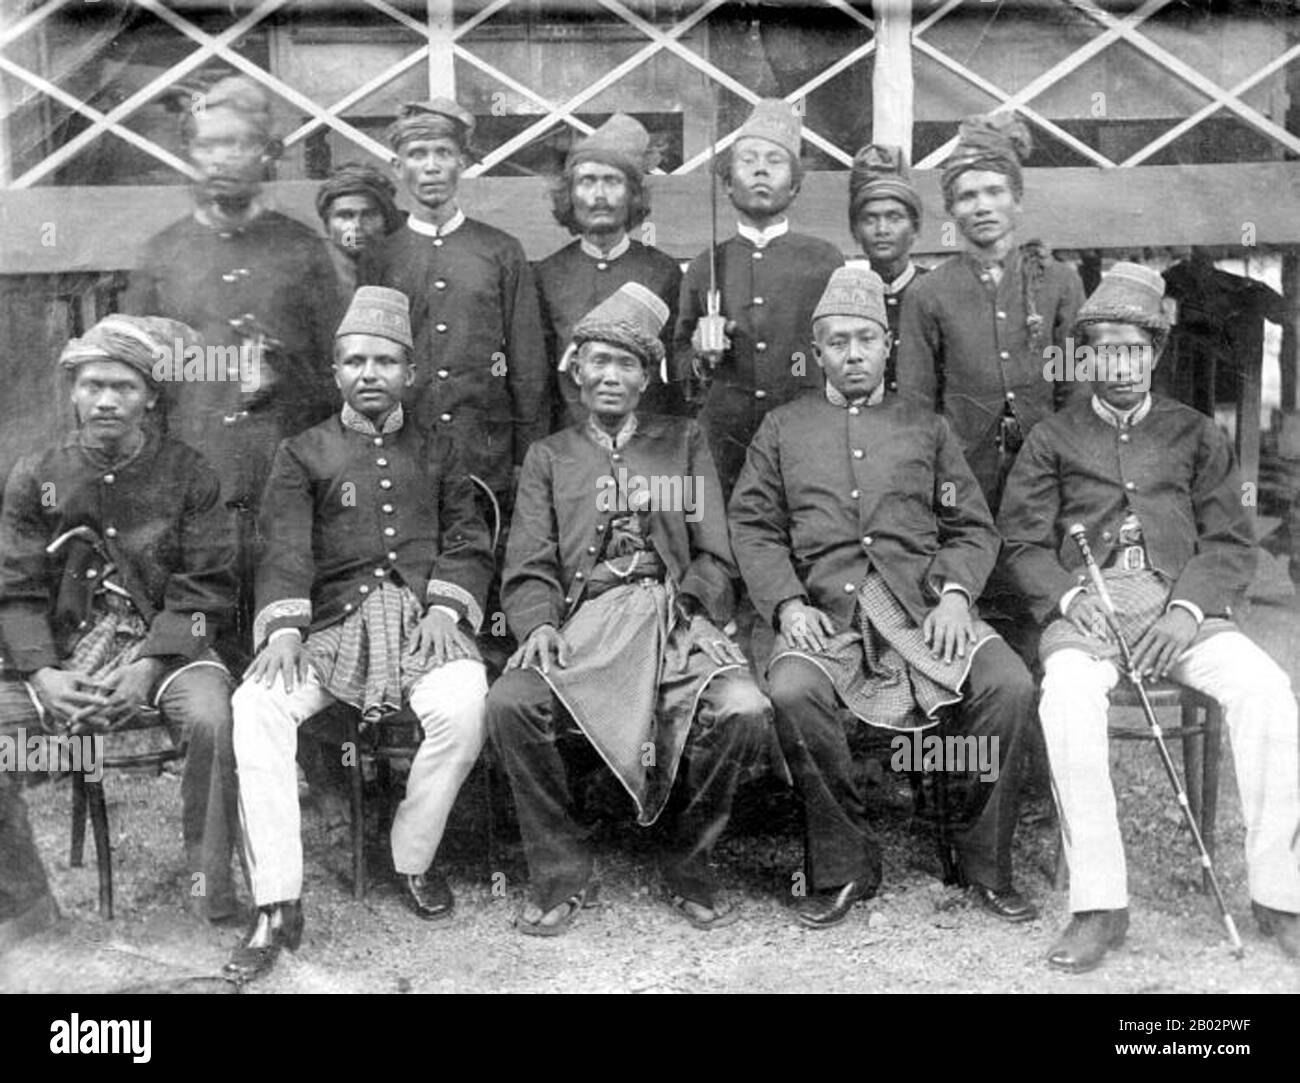 The Aceh War, also known as the Dutch War or the Infidel War (1873–1914), was an armed military conflict between the Sultanate of Aceh and the Netherlands which was triggered by discussions between representatives of Aceh and the United Kingdom in Singapore during early 1873.  The war was part of a series of conflicts in the late 19th century that consolidated Dutch rule over modern-day Indonesia.  Teuku Umar (Meulaboh, West Aceh, 1854 – February 11, 1899) was a leader of a guerrilla campaign against the Dutch in Aceh during the Aceh War. He fell when Dutch troops launched a surprise attack in Stock Photo